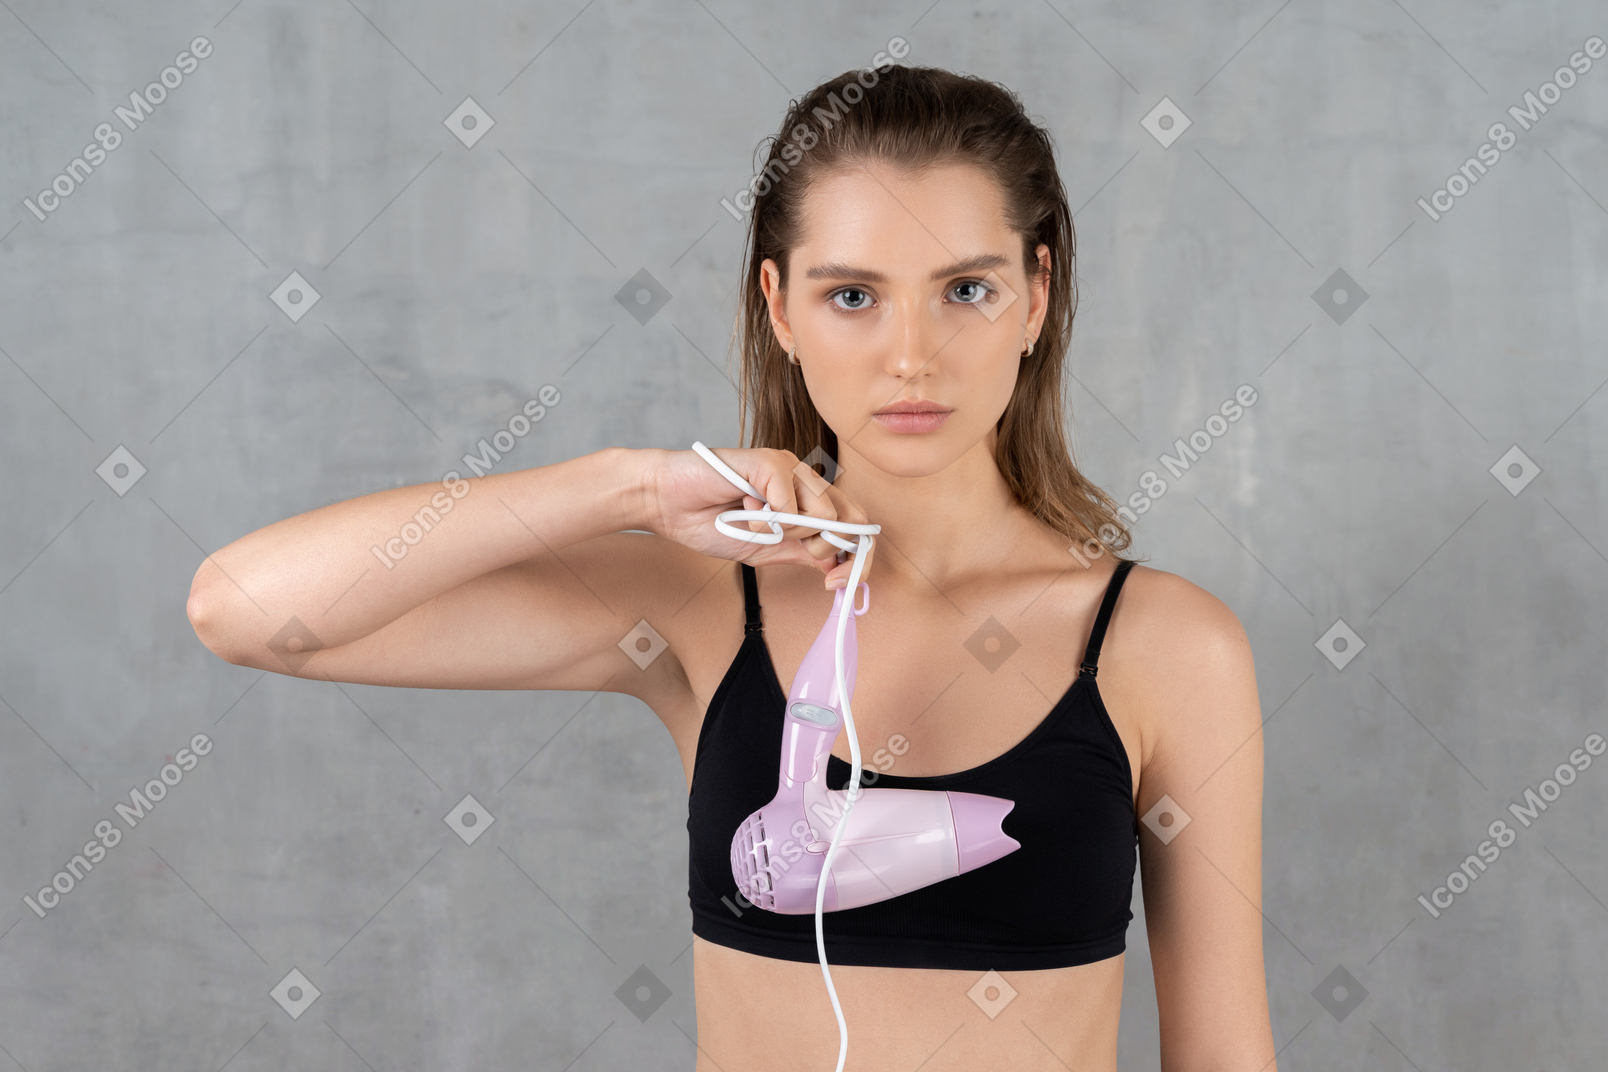 Attractive young woman with hairdryer cord wrapped around hand